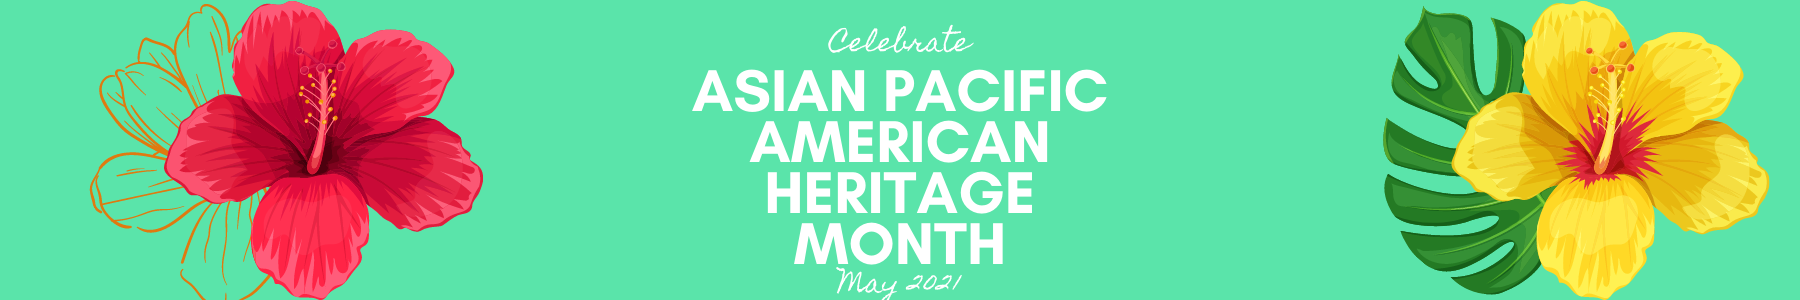 Asian Pacific American Heritage Month Banners  1 